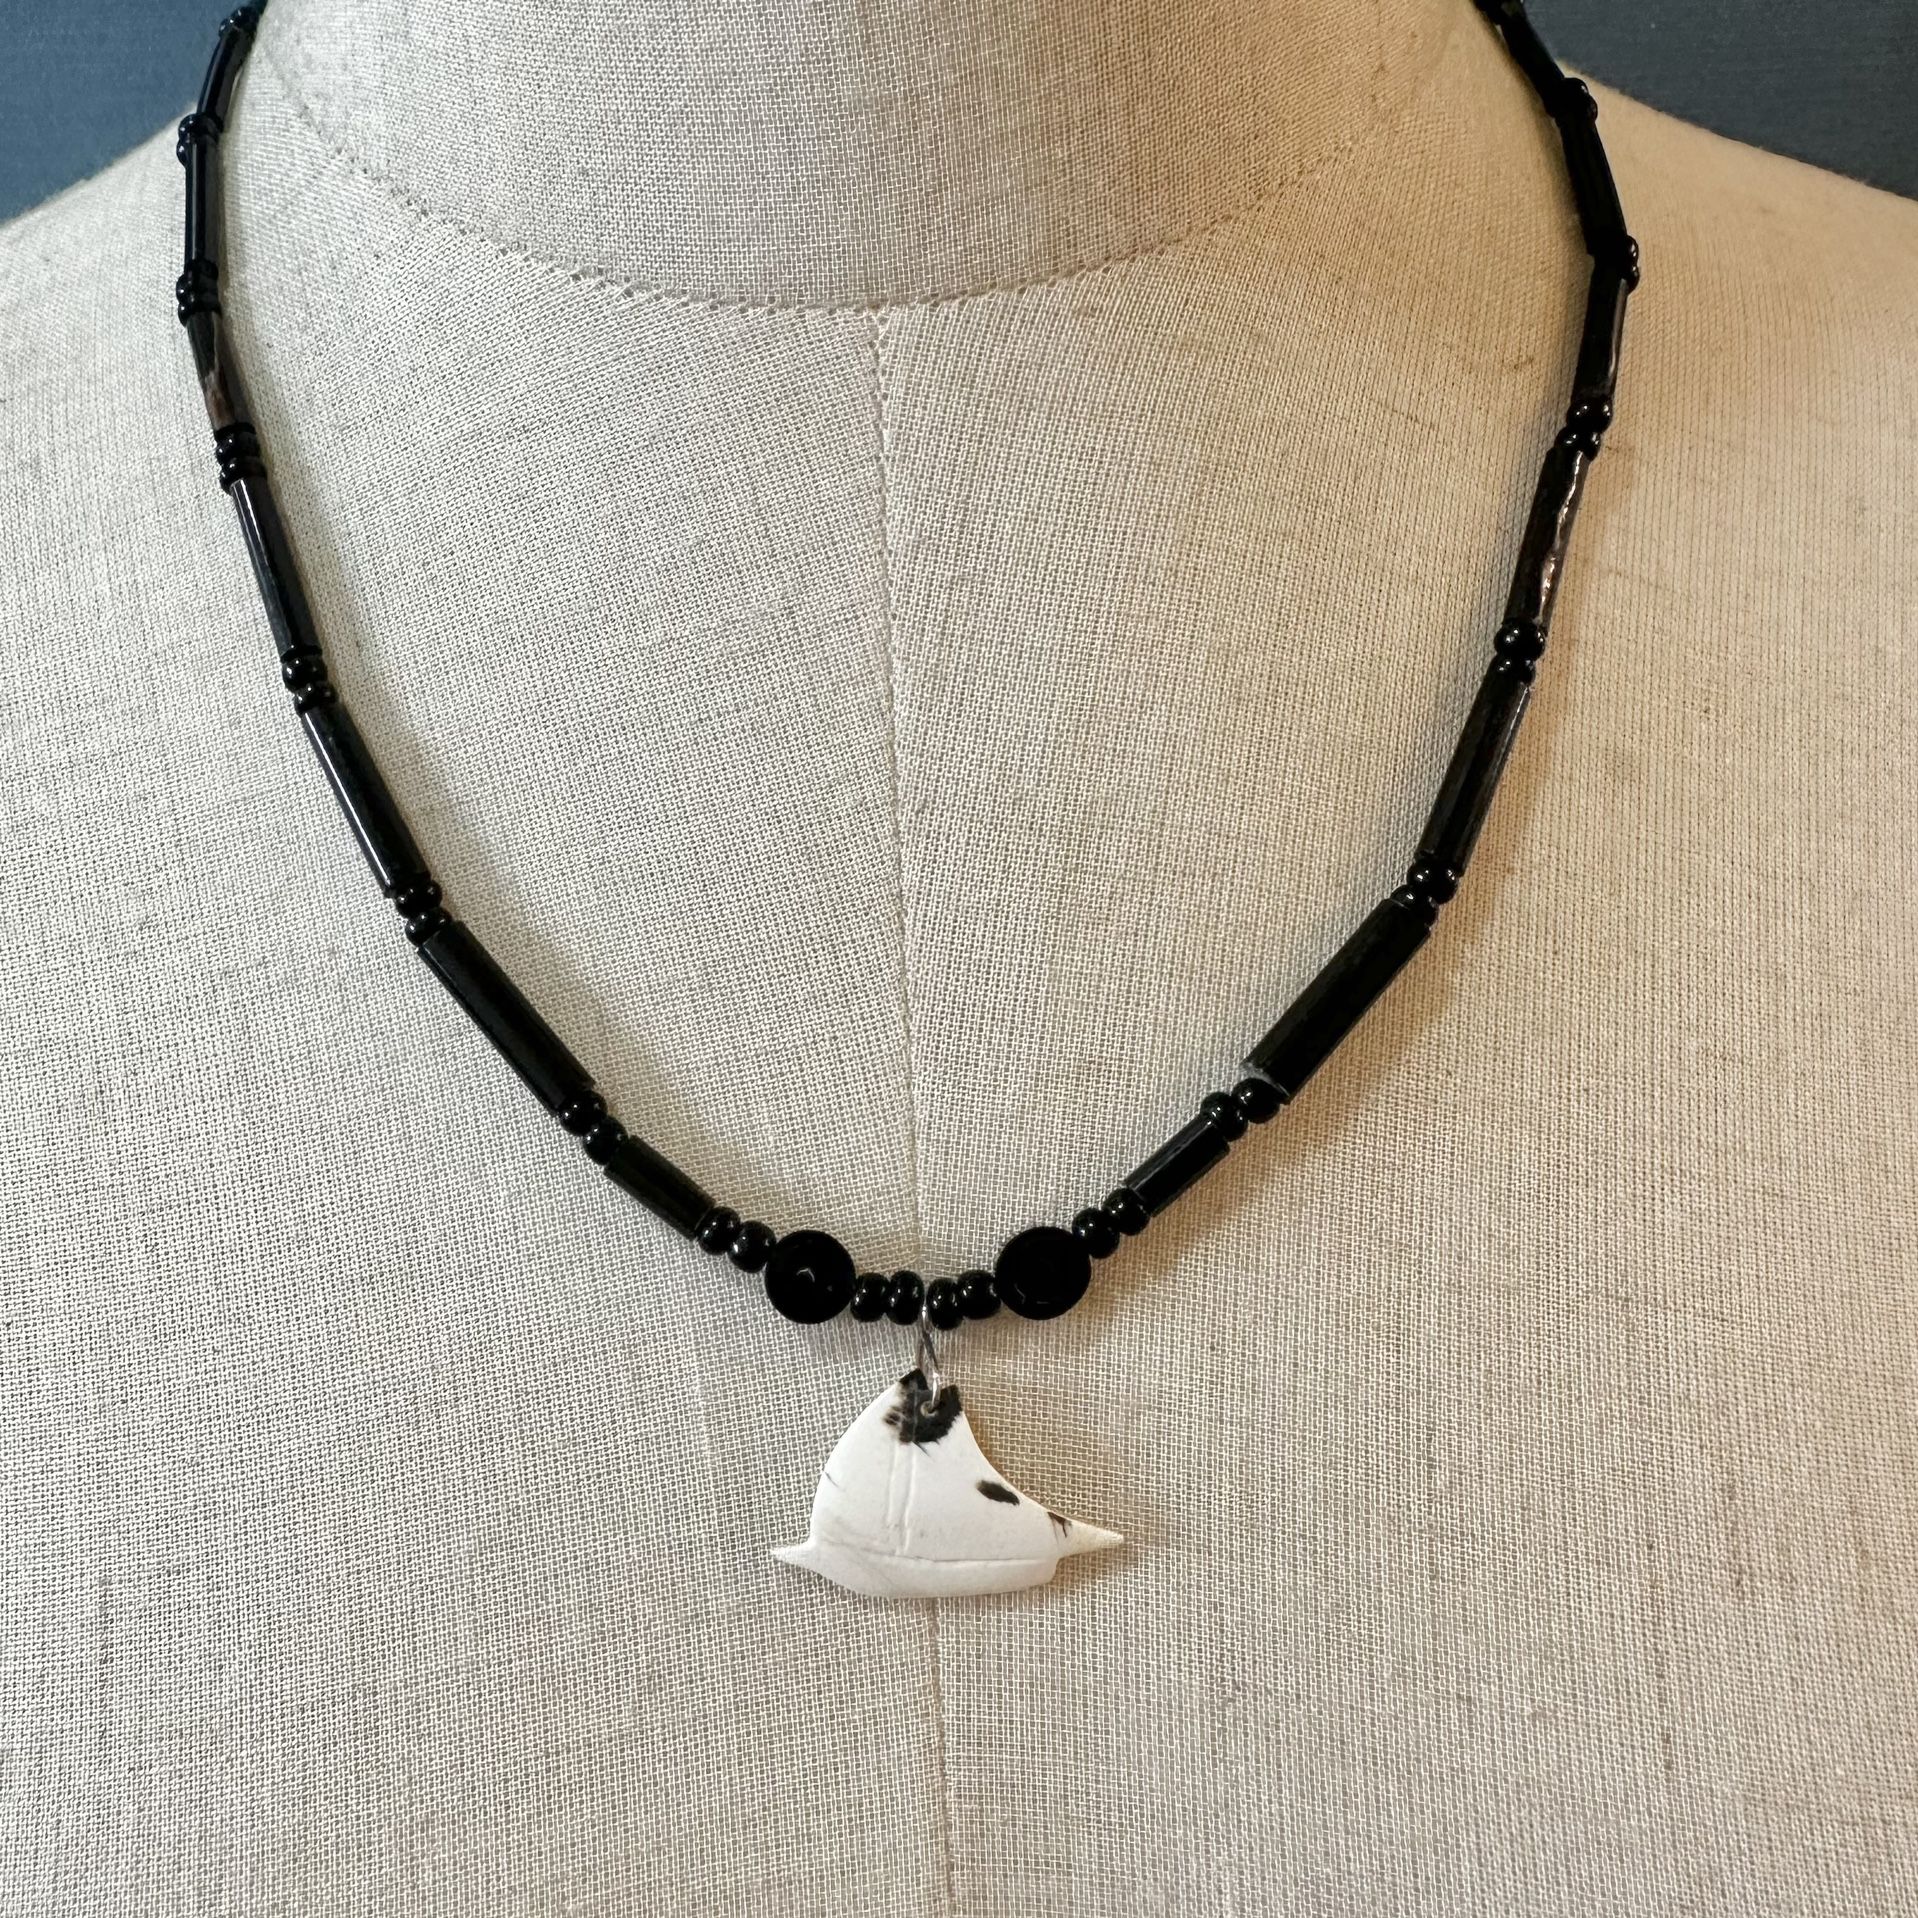 Black Coral Sailboat Shell Pendant Necklace 